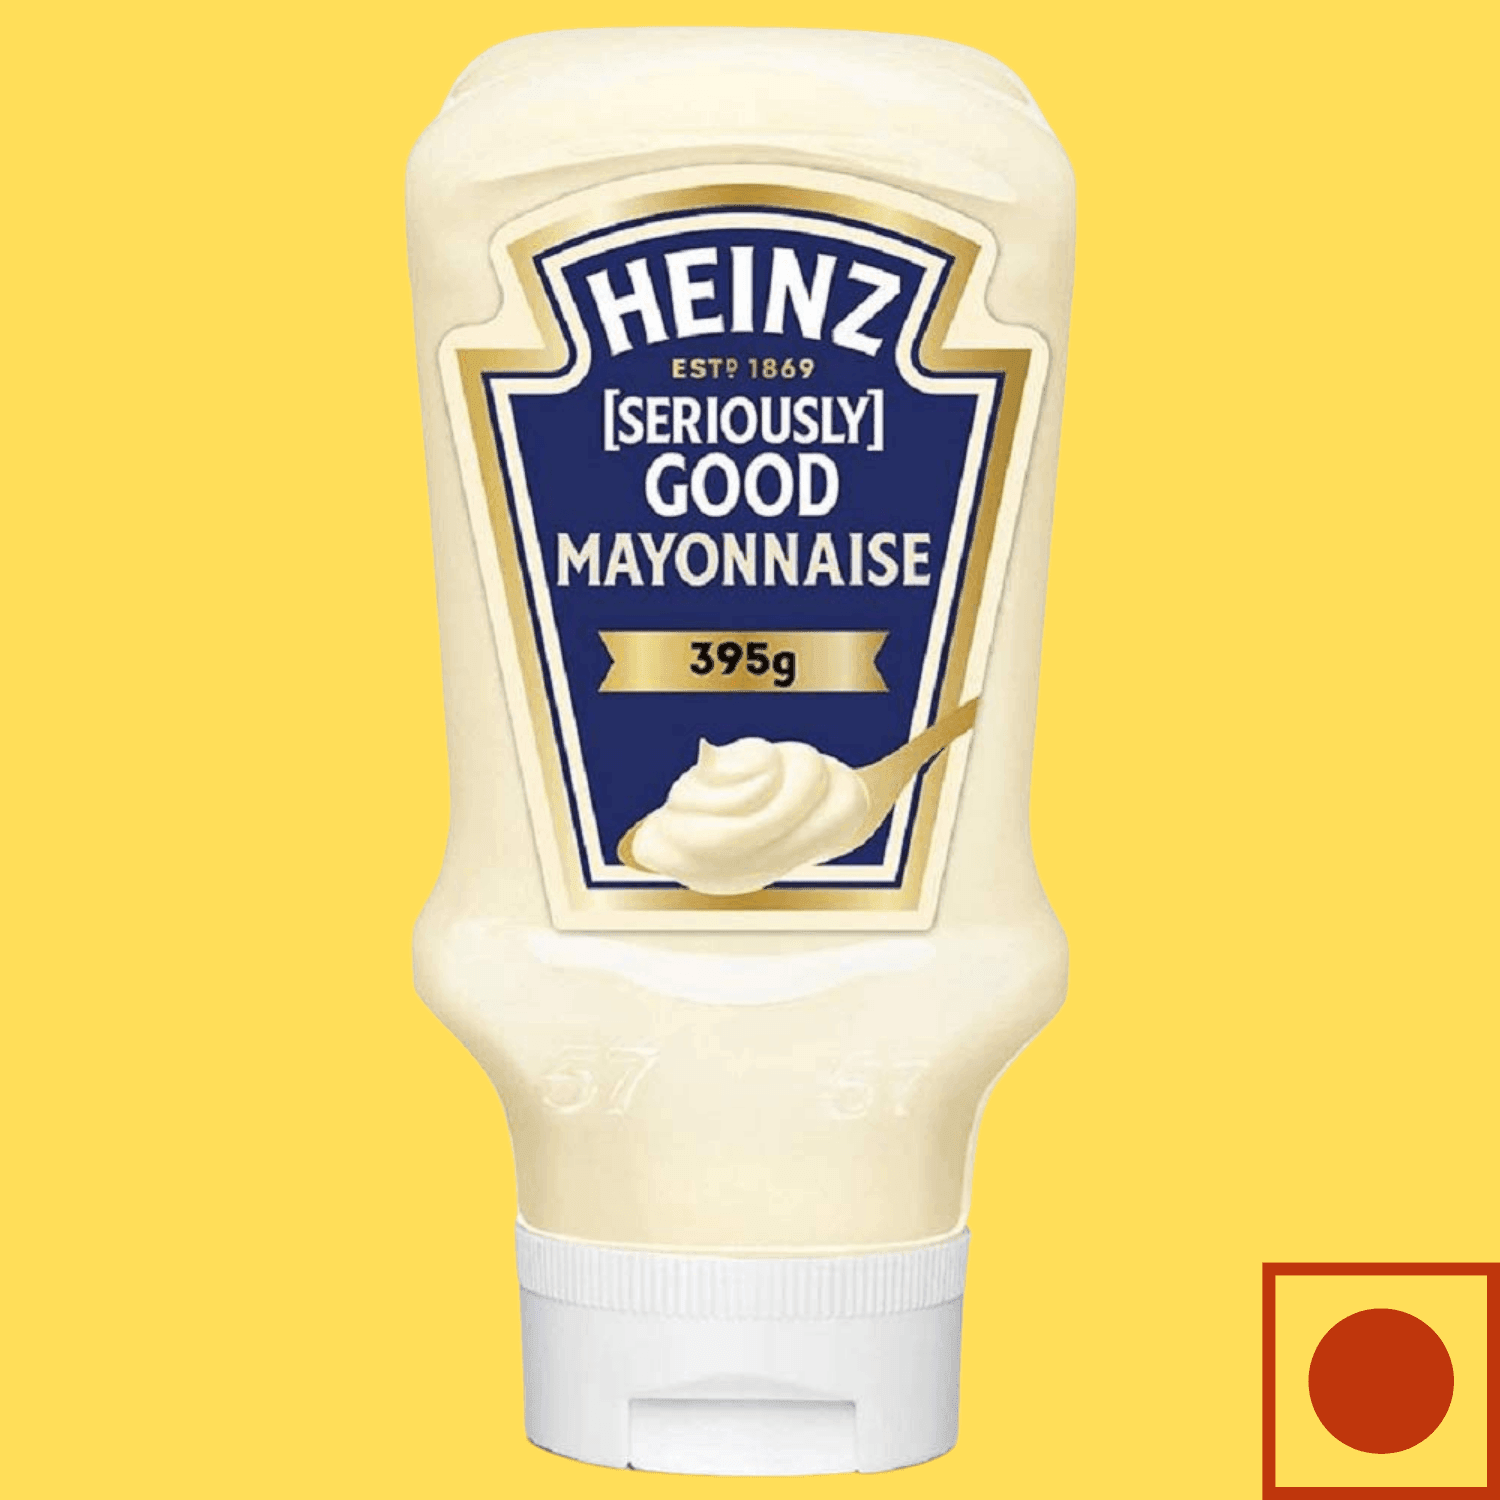 HEINZ Seriously Good Mayonnaise, 395 g (Imported) - Super 7 Mart